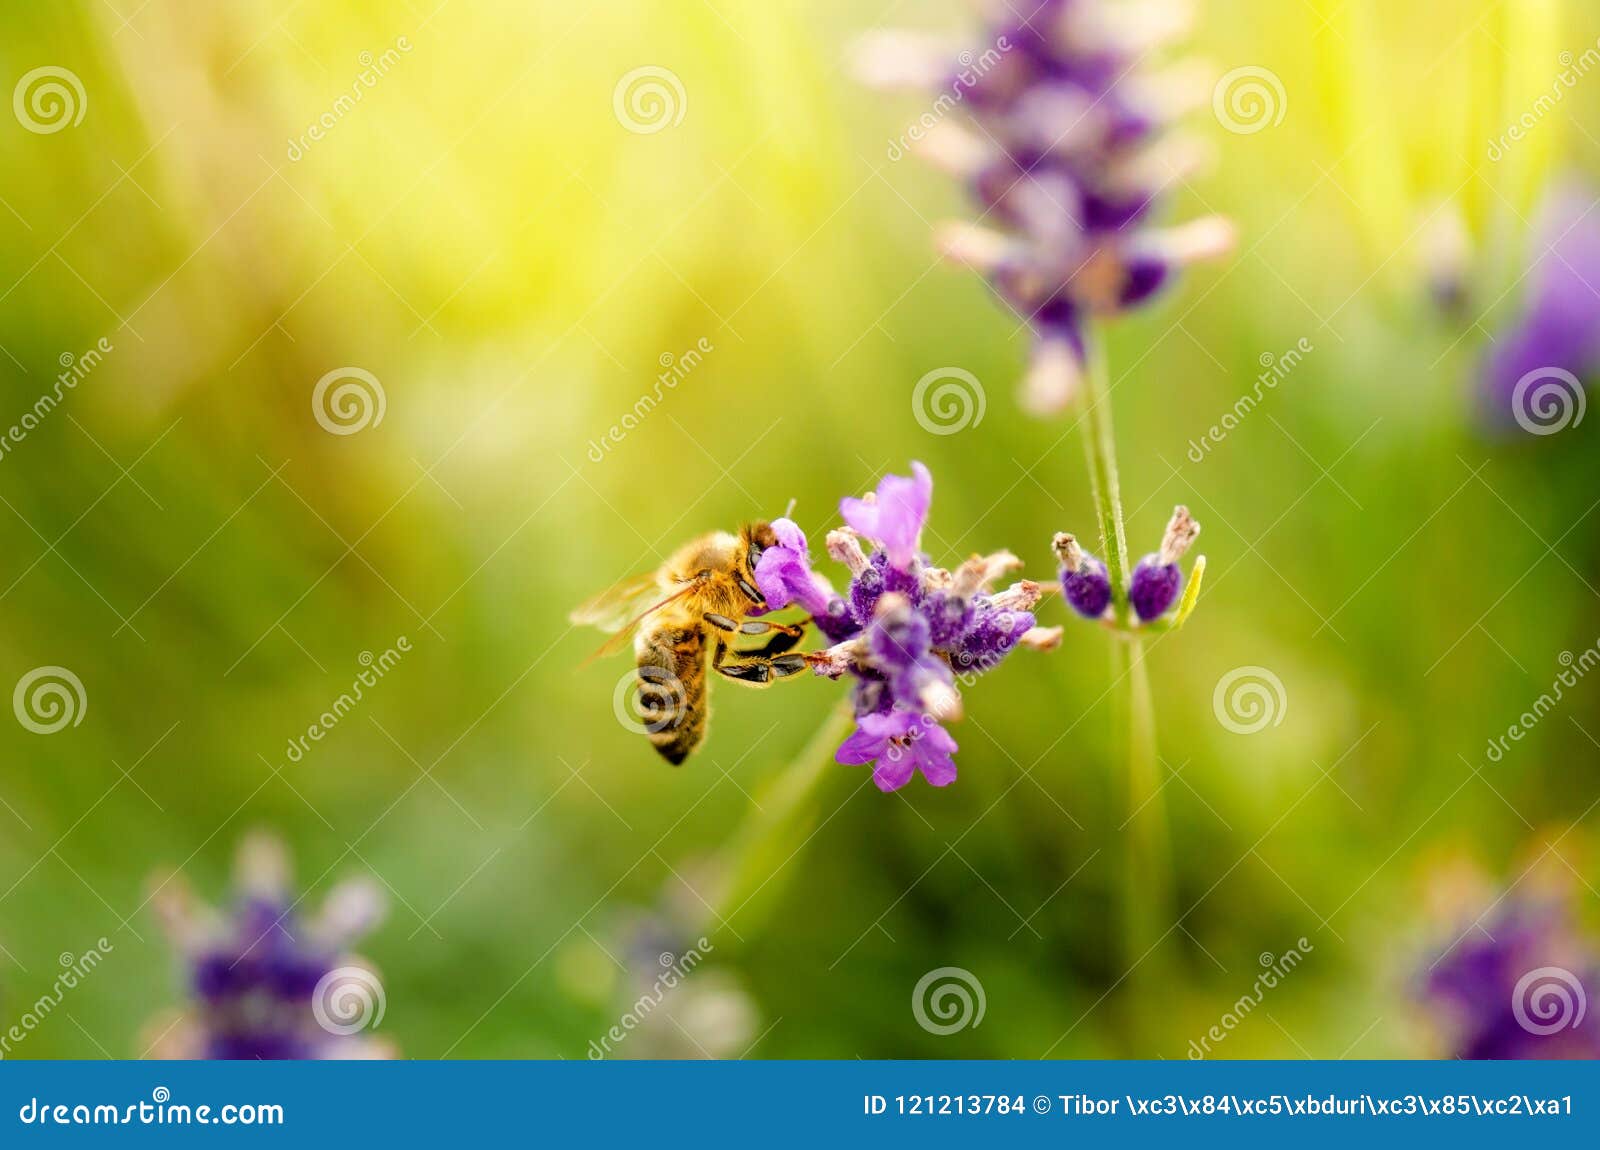 honey bee on a lavender and collecting polen. flying honeybee. one bee flying during sunshine day. insect. lavenders field with be